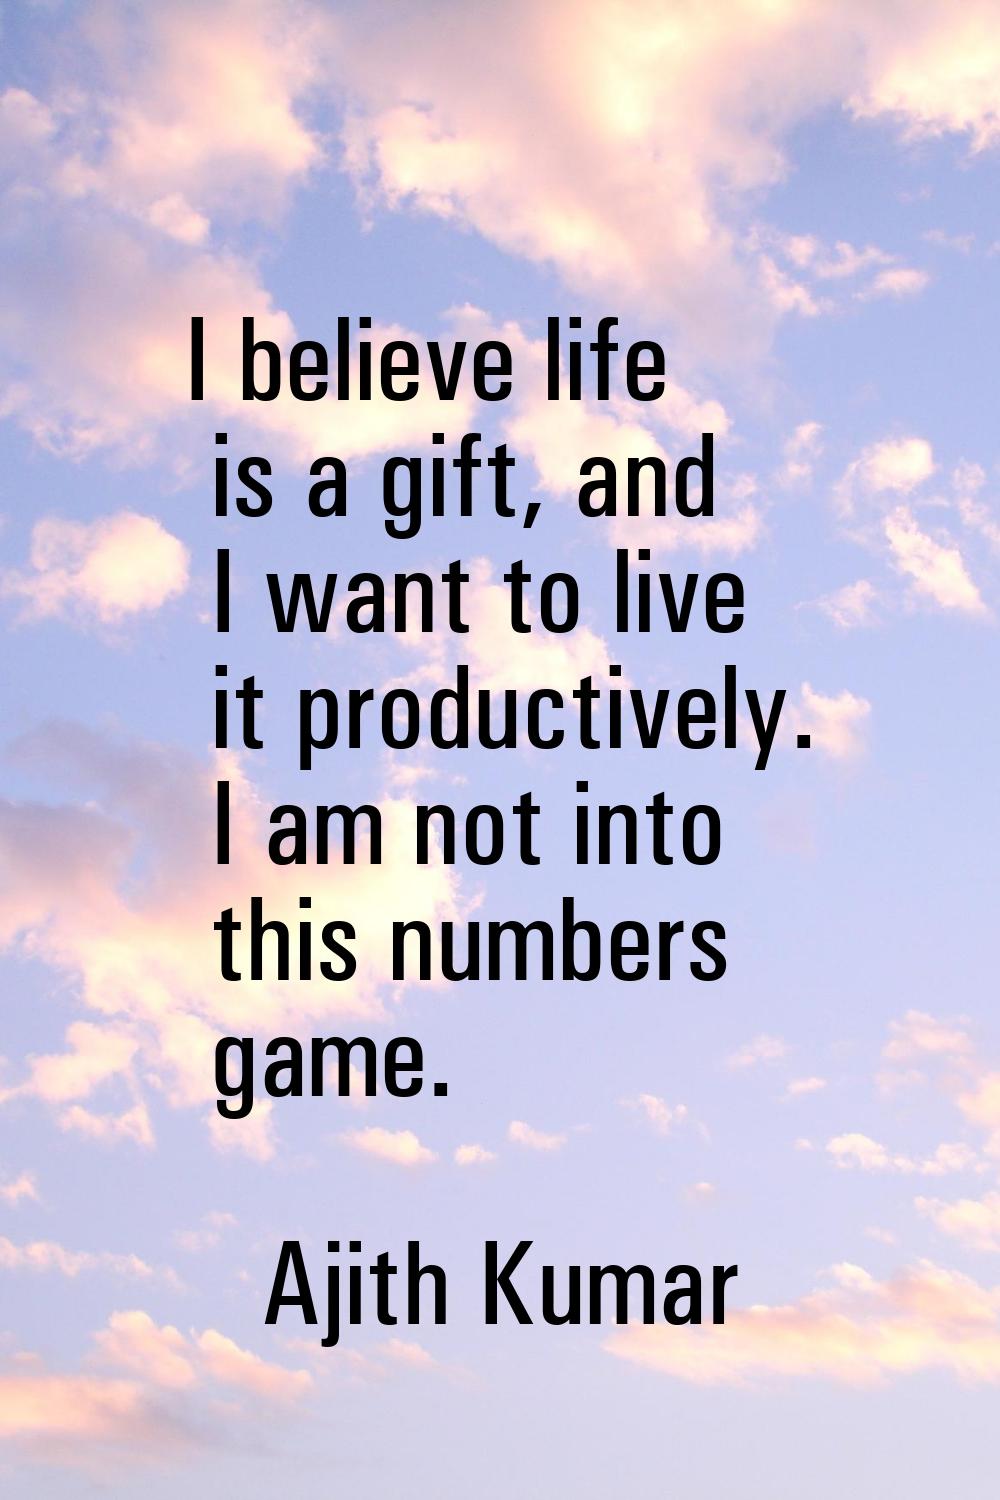 I believe life is a gift, and I want to live it productively. I am not into this numbers game.